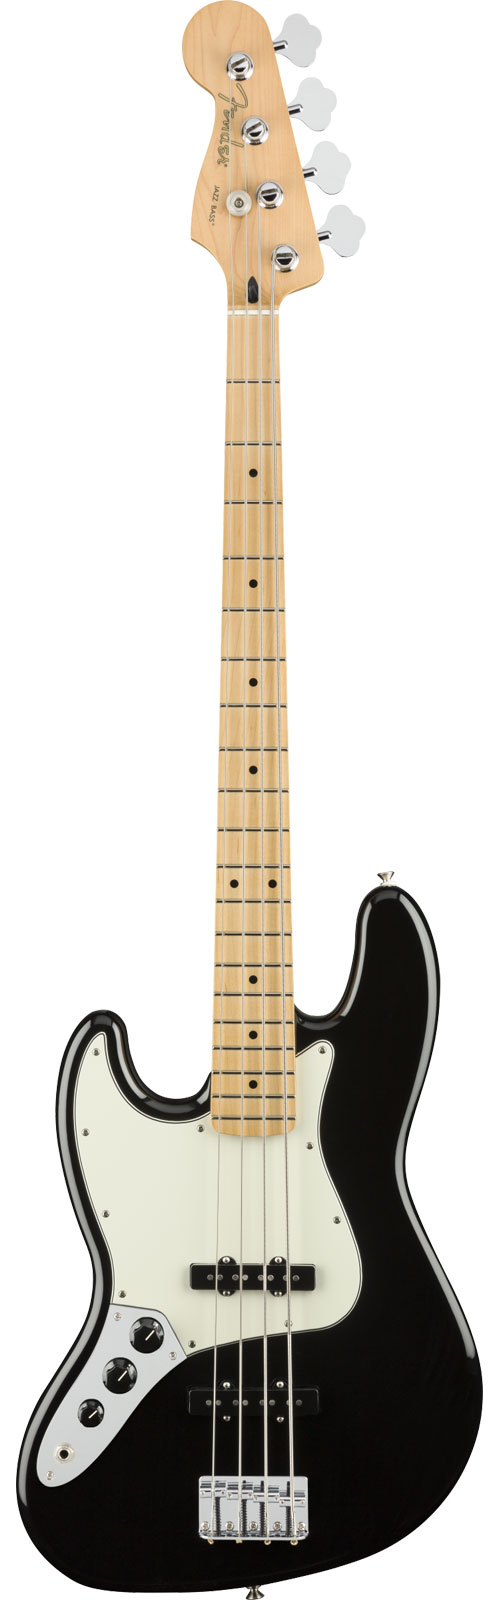 FENDER MEXICAN PLAYER JAZZ BASS LHED MN, BLACK